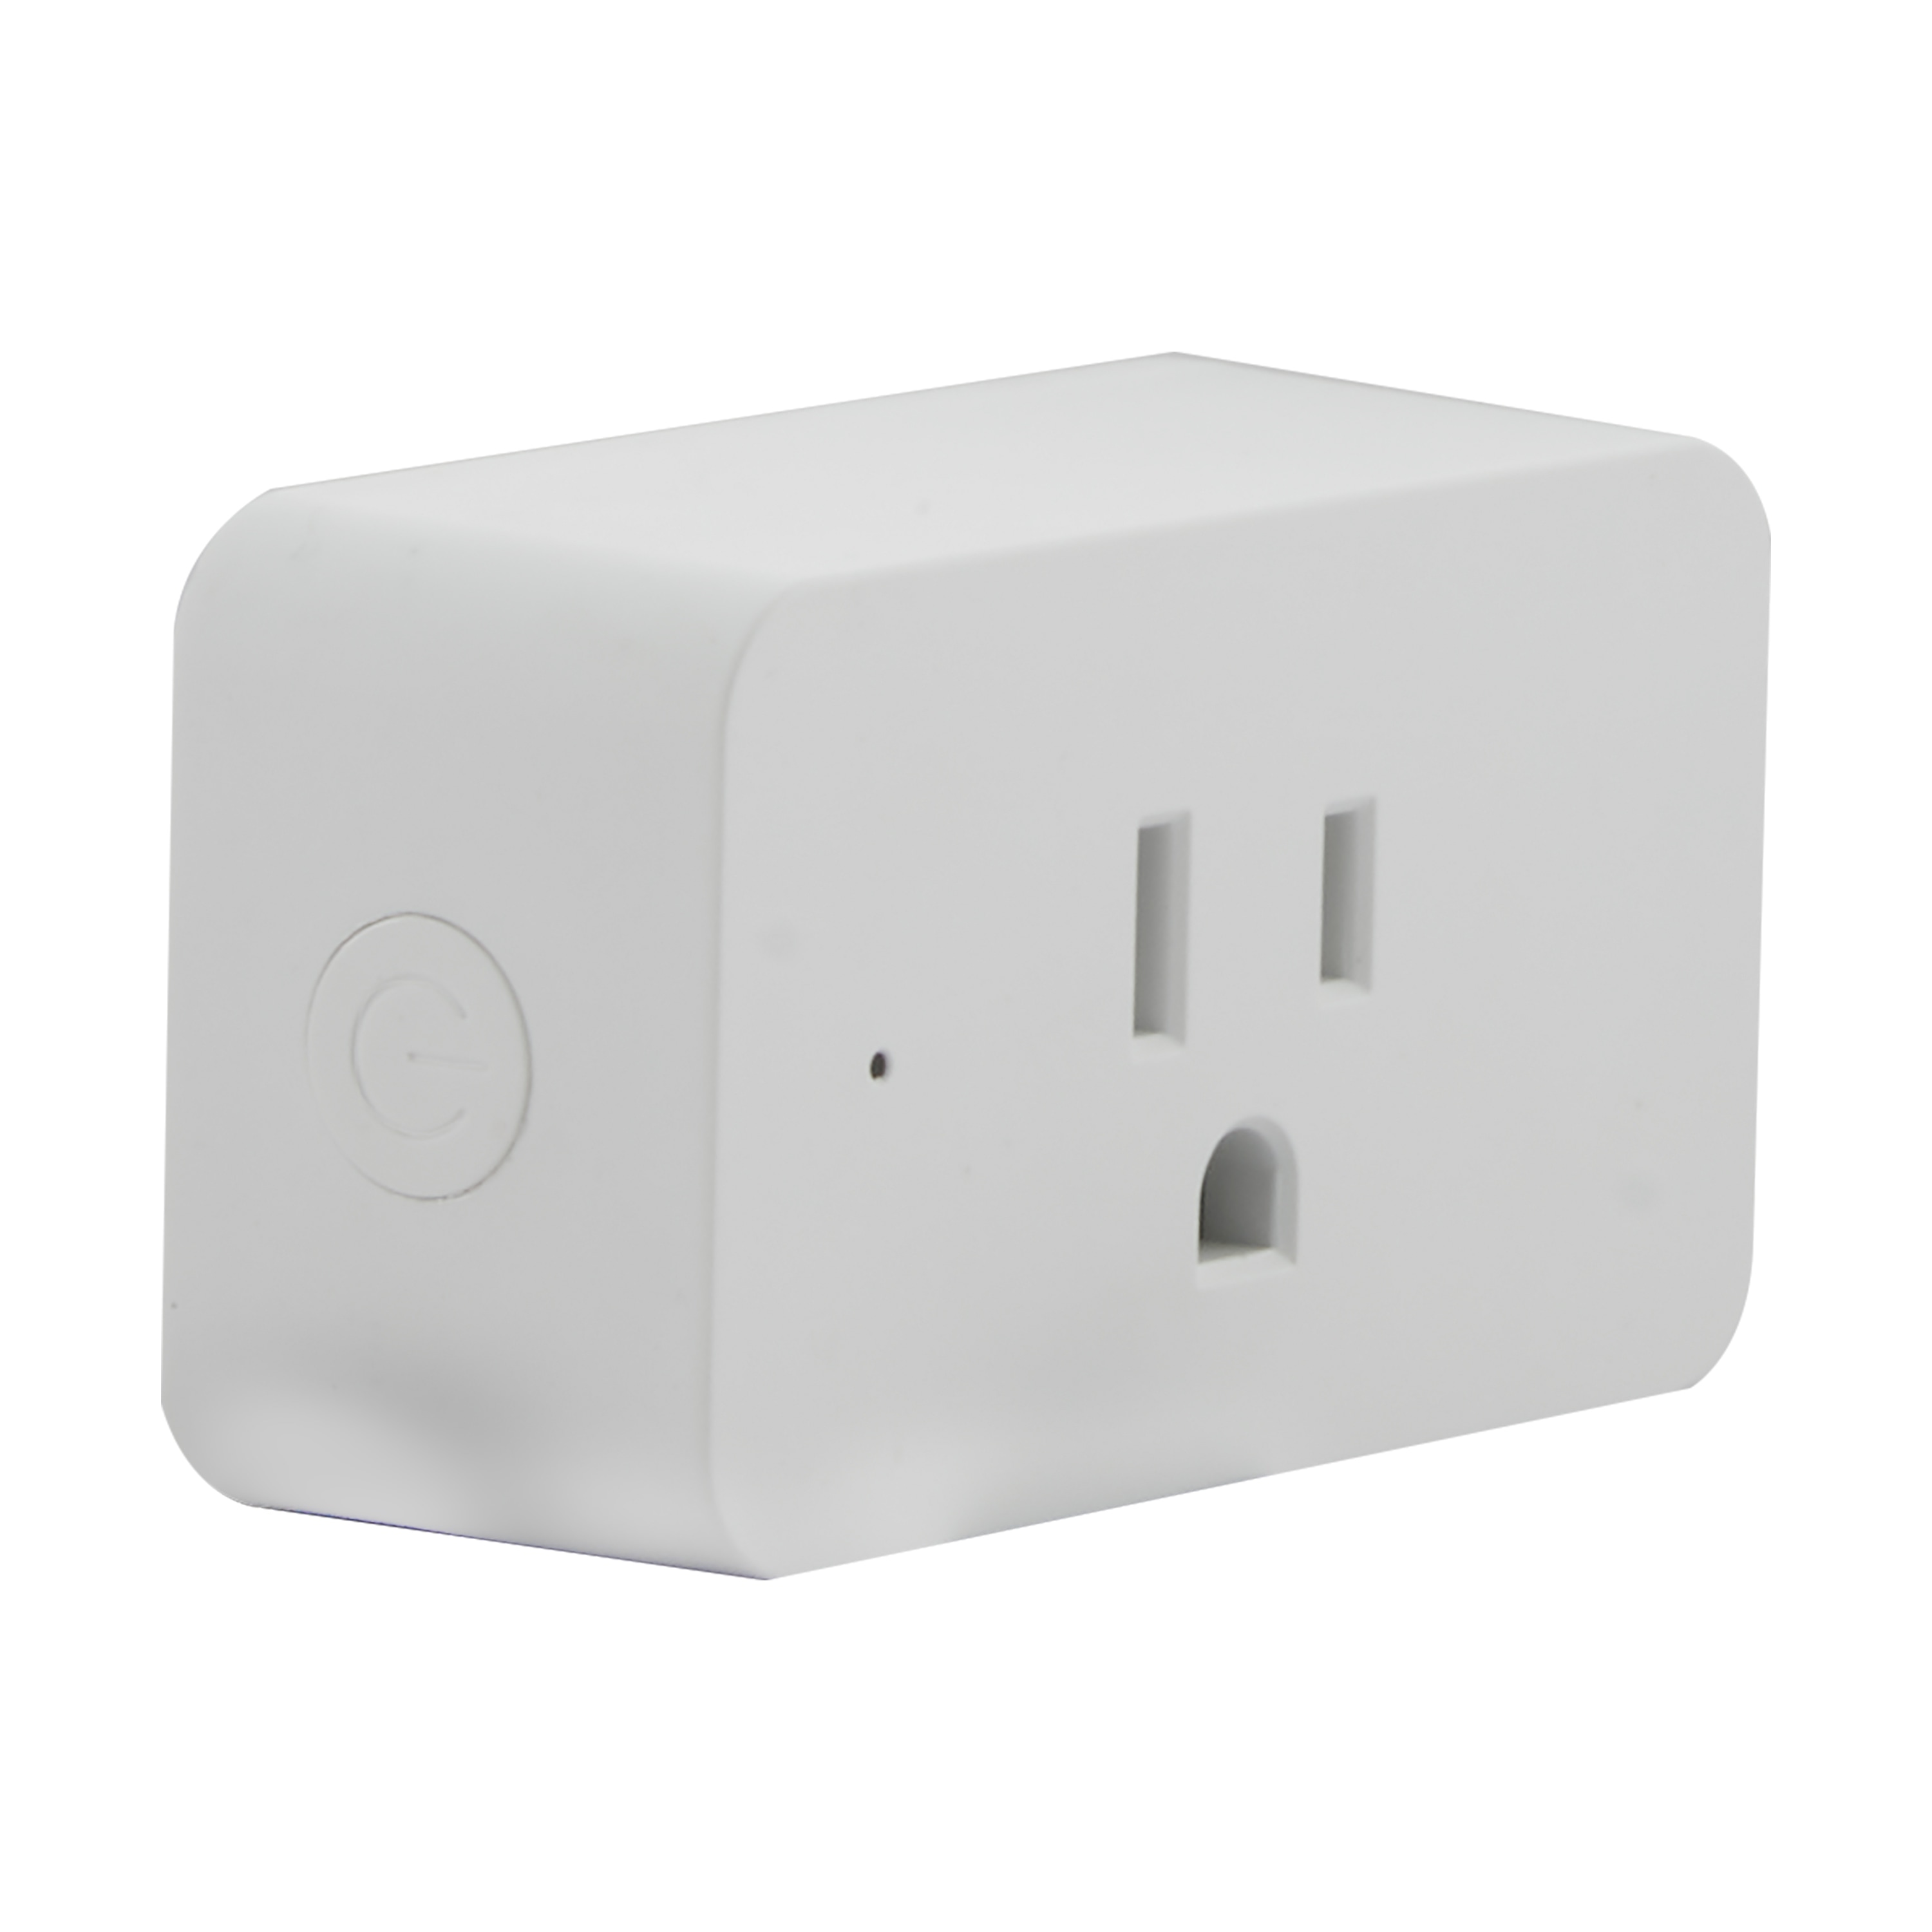 https://ak1.ostkcdn.com/images/products/is/images/direct/547f959c0fb8e06fc624b8ca20563f1929652152/Starfish-WiFi-Smart-Plug-Dimmable-120V-Outlet-15A-Rectangle.jpg